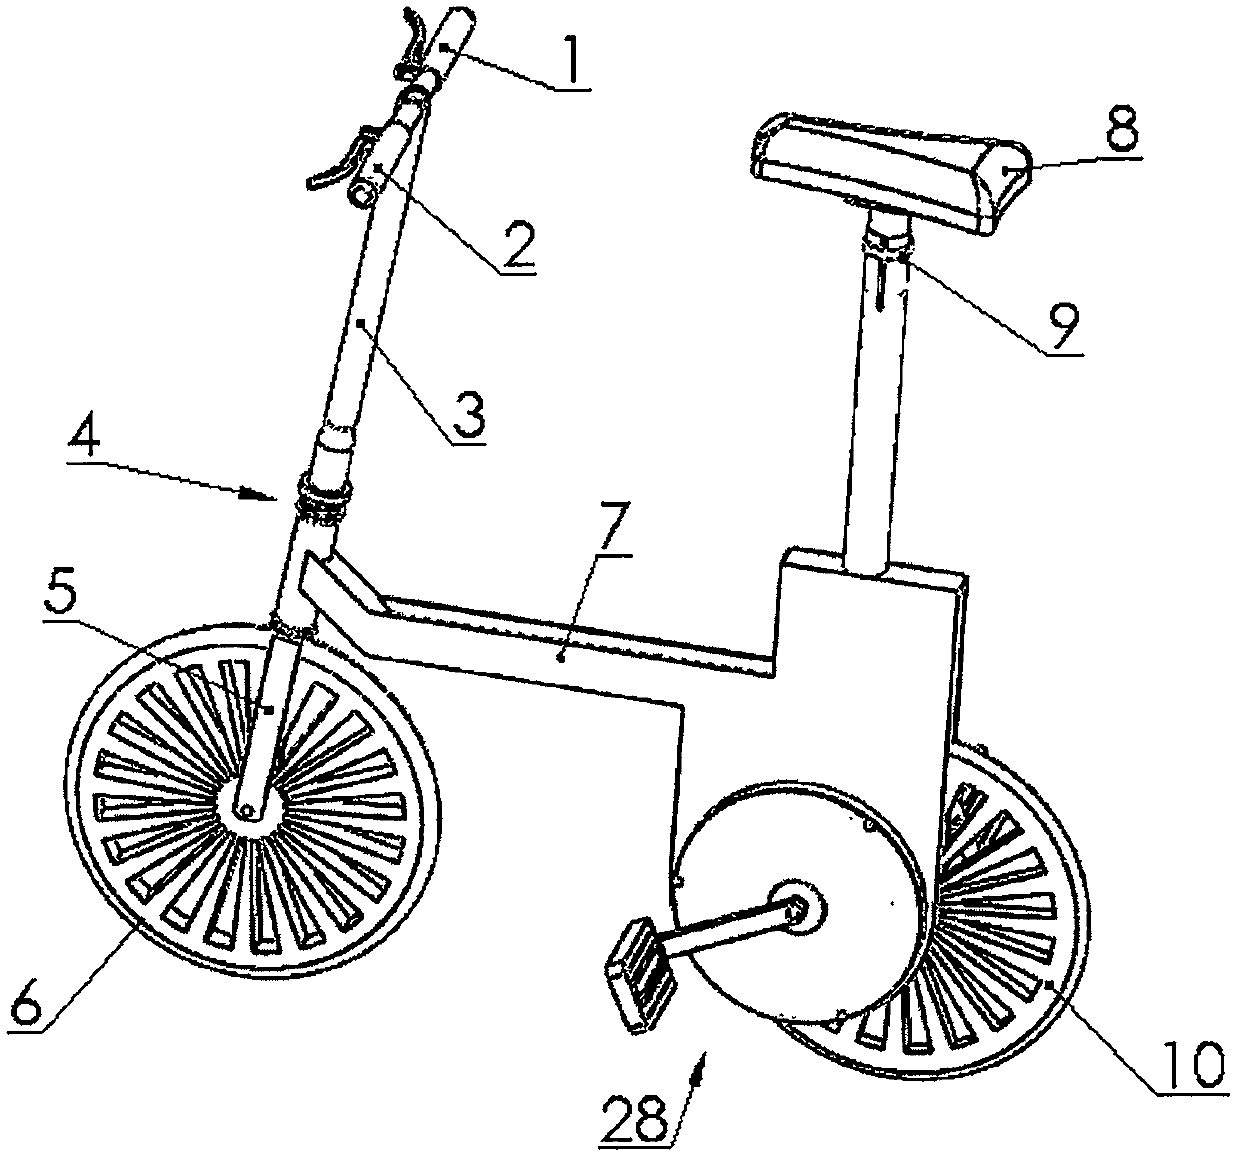 Gear-driven bicycle